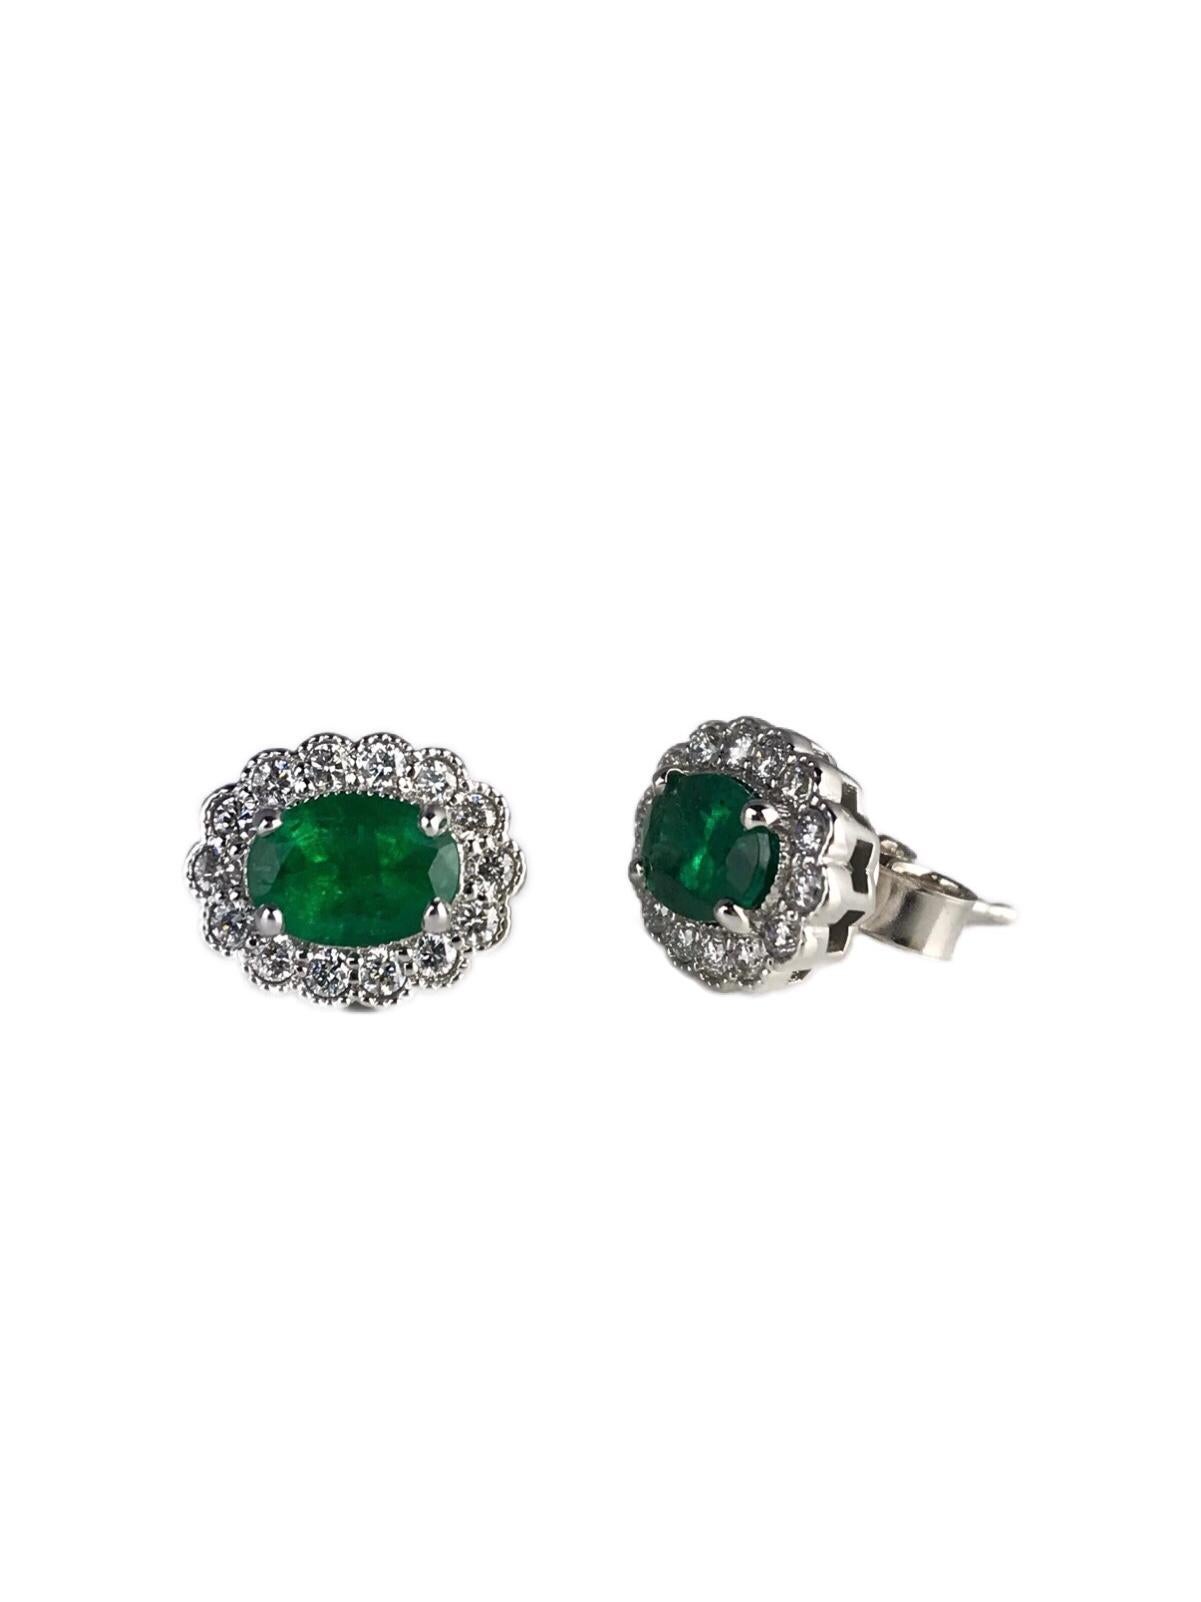 Presenting these exquisite earrings with oval-cut emerald centers, each elegantly encircled by a halo of round, natural diamonds. The intricate milgrain detailing in the setting infuses a timeless, classic allure. The emeralds, in their 7x5mm oval